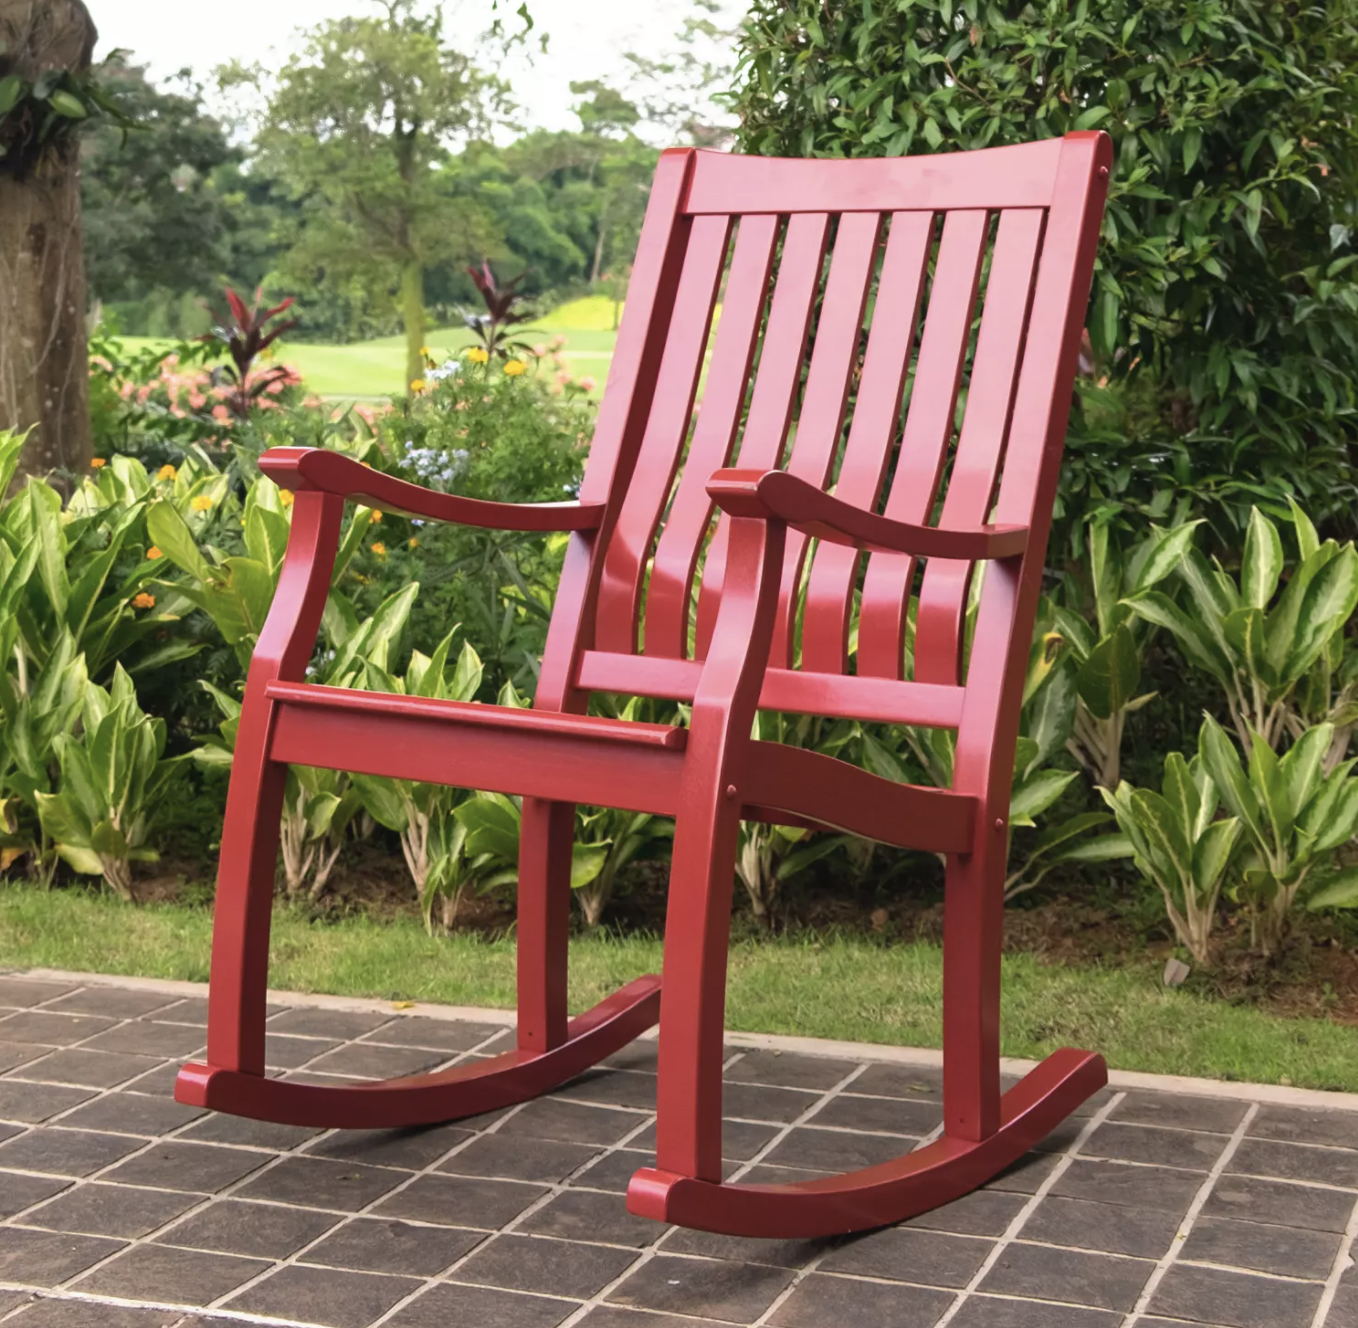 Great rocking chairs are an American tradition, and this comfy, weather-resistant, eucalyptus wood painted porch rocker is a great addition.